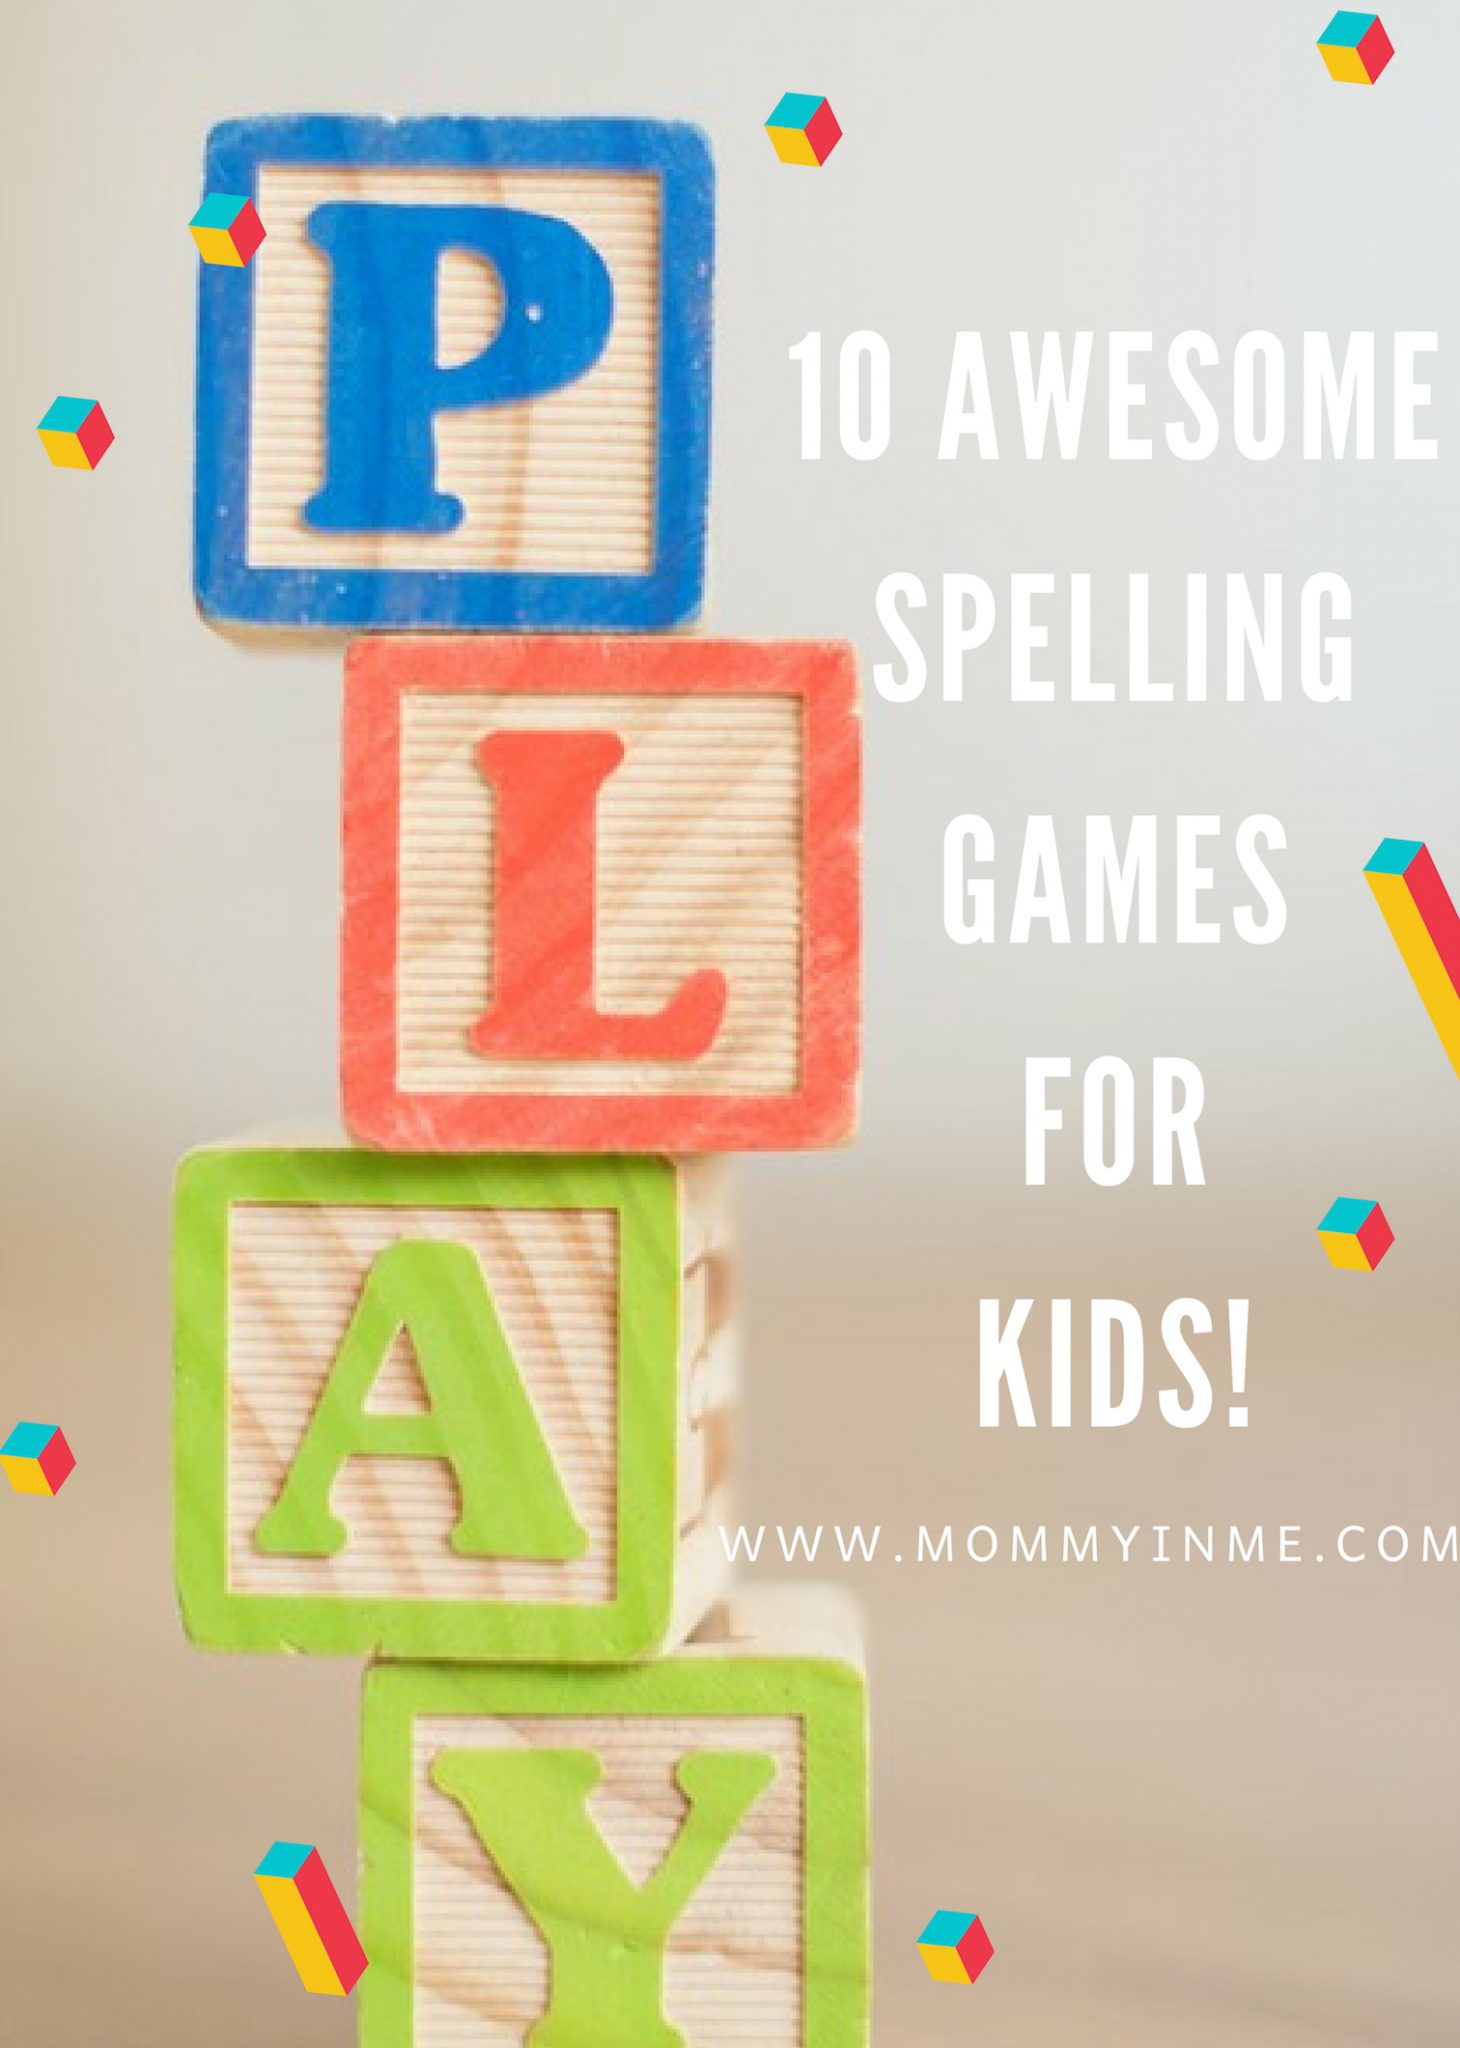 Have you invested in Spelling games for kids yet? if not, here are 10 games that you're kids will enjoy and have fun. And in turn you'll be seeing an amazing grip in their vocabulary and spell learning . Do invest in some of these games. #spelling #vocabulary #games #kidsgames #spellgames #spellinggames #education #fungames